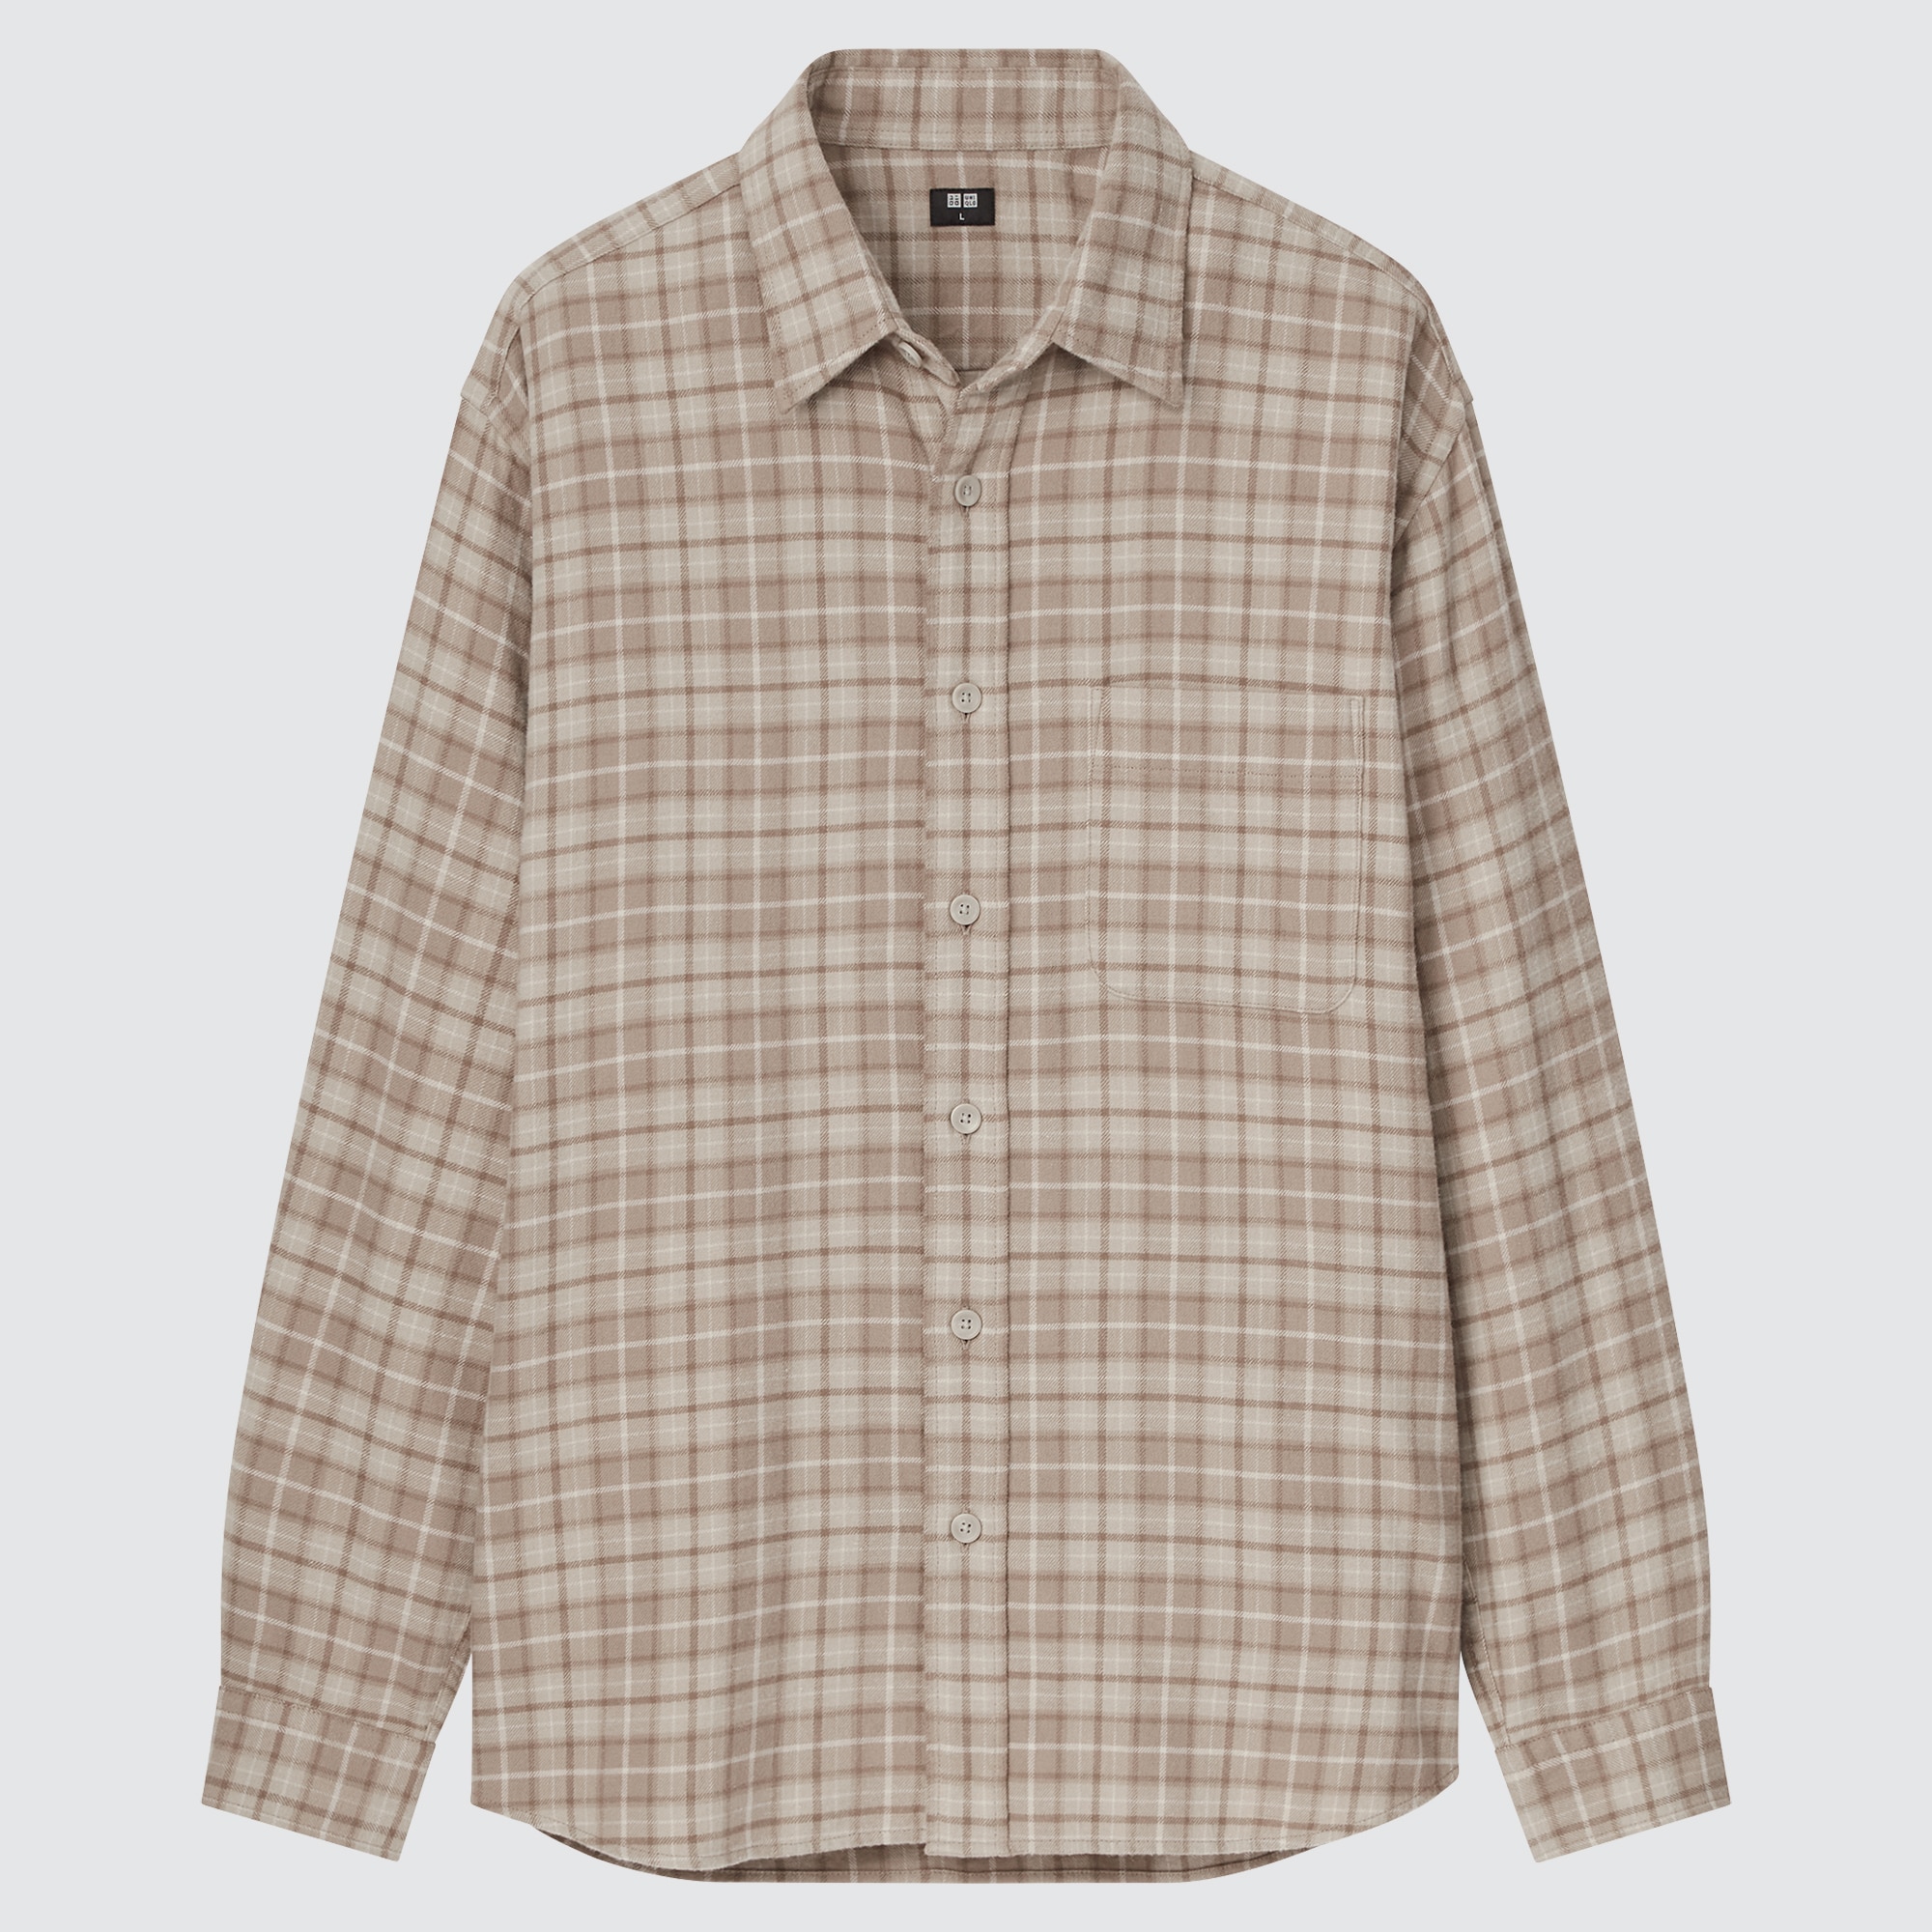 KIDS FLANNEL CHECKED LONG SLEEVE SHIRT  UNIQLO VN